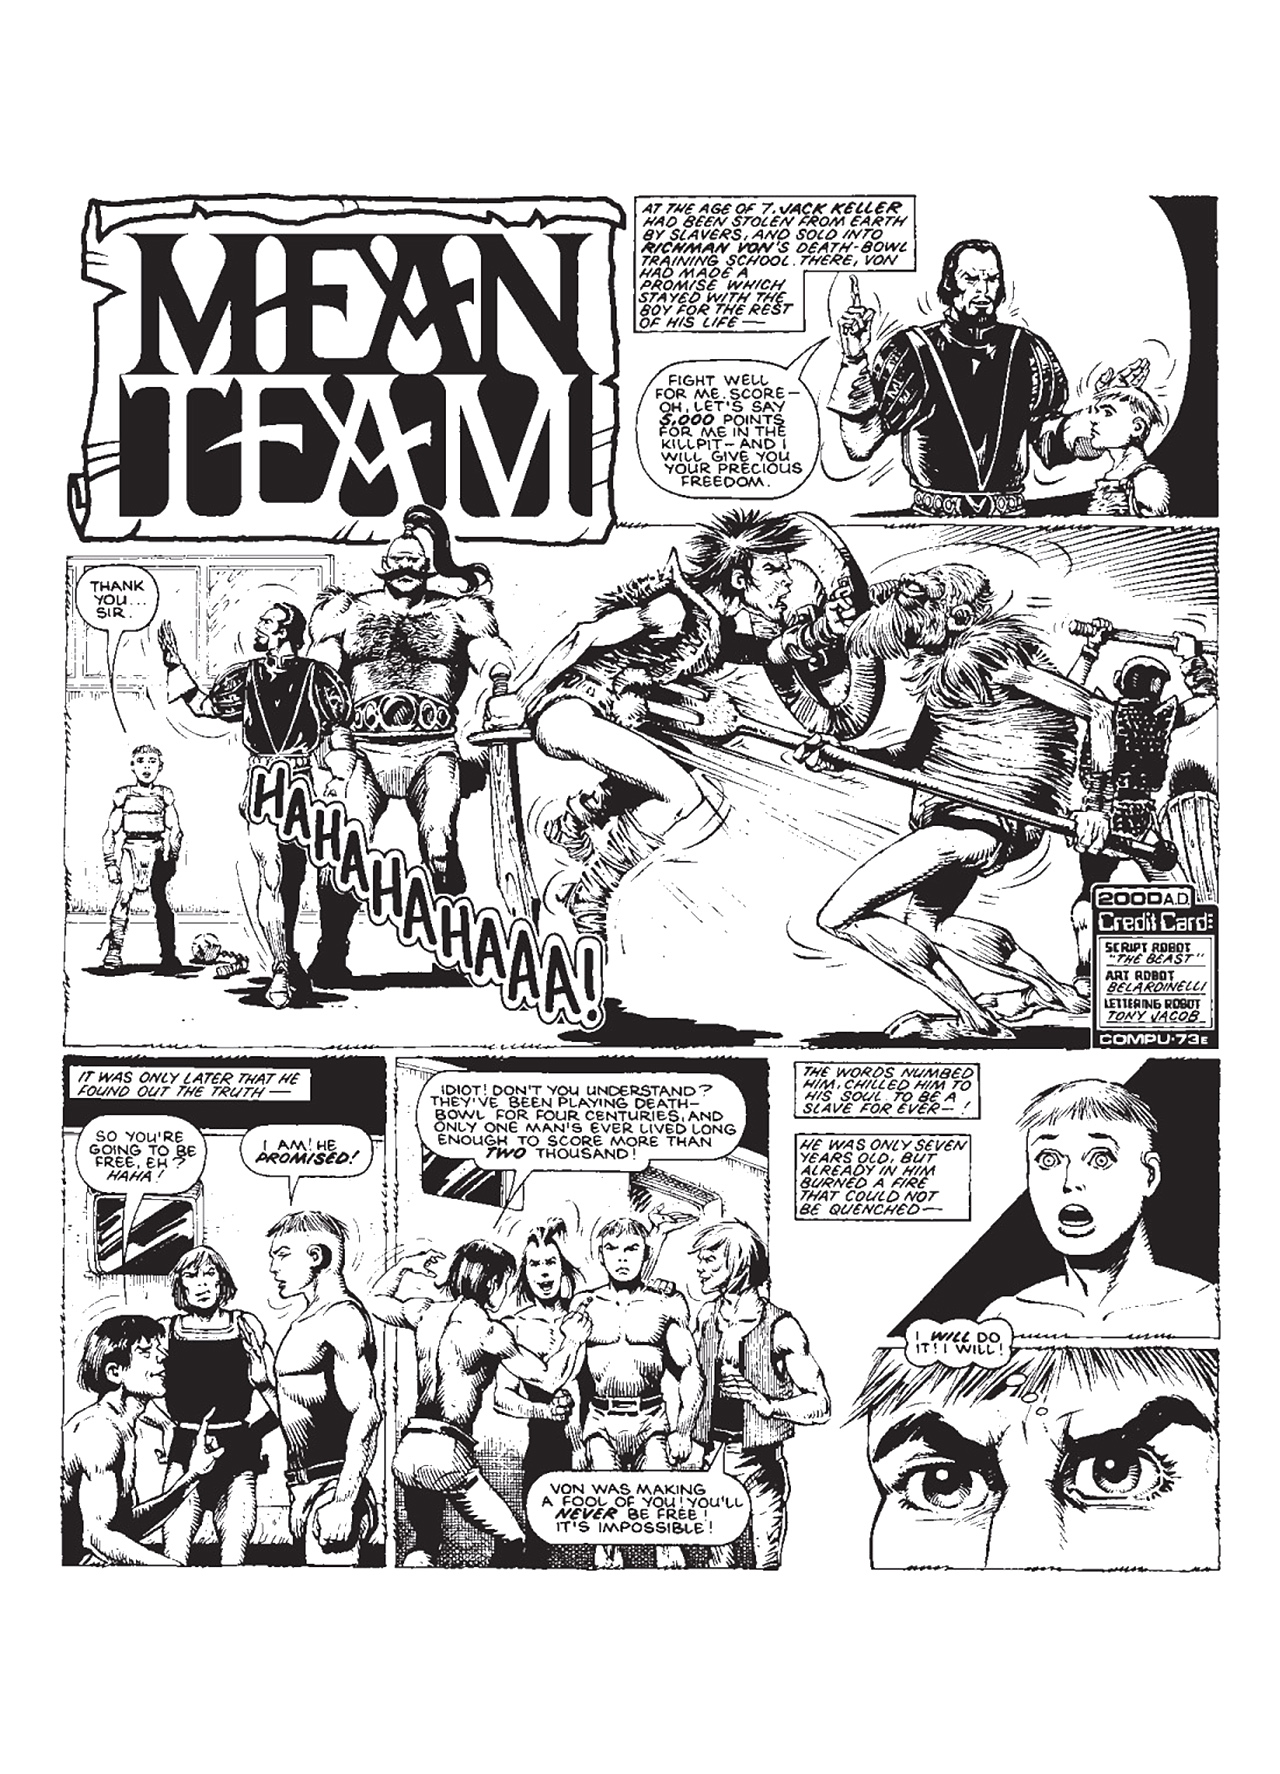 Read online Mean Team comic -  Issue # TPB - 37